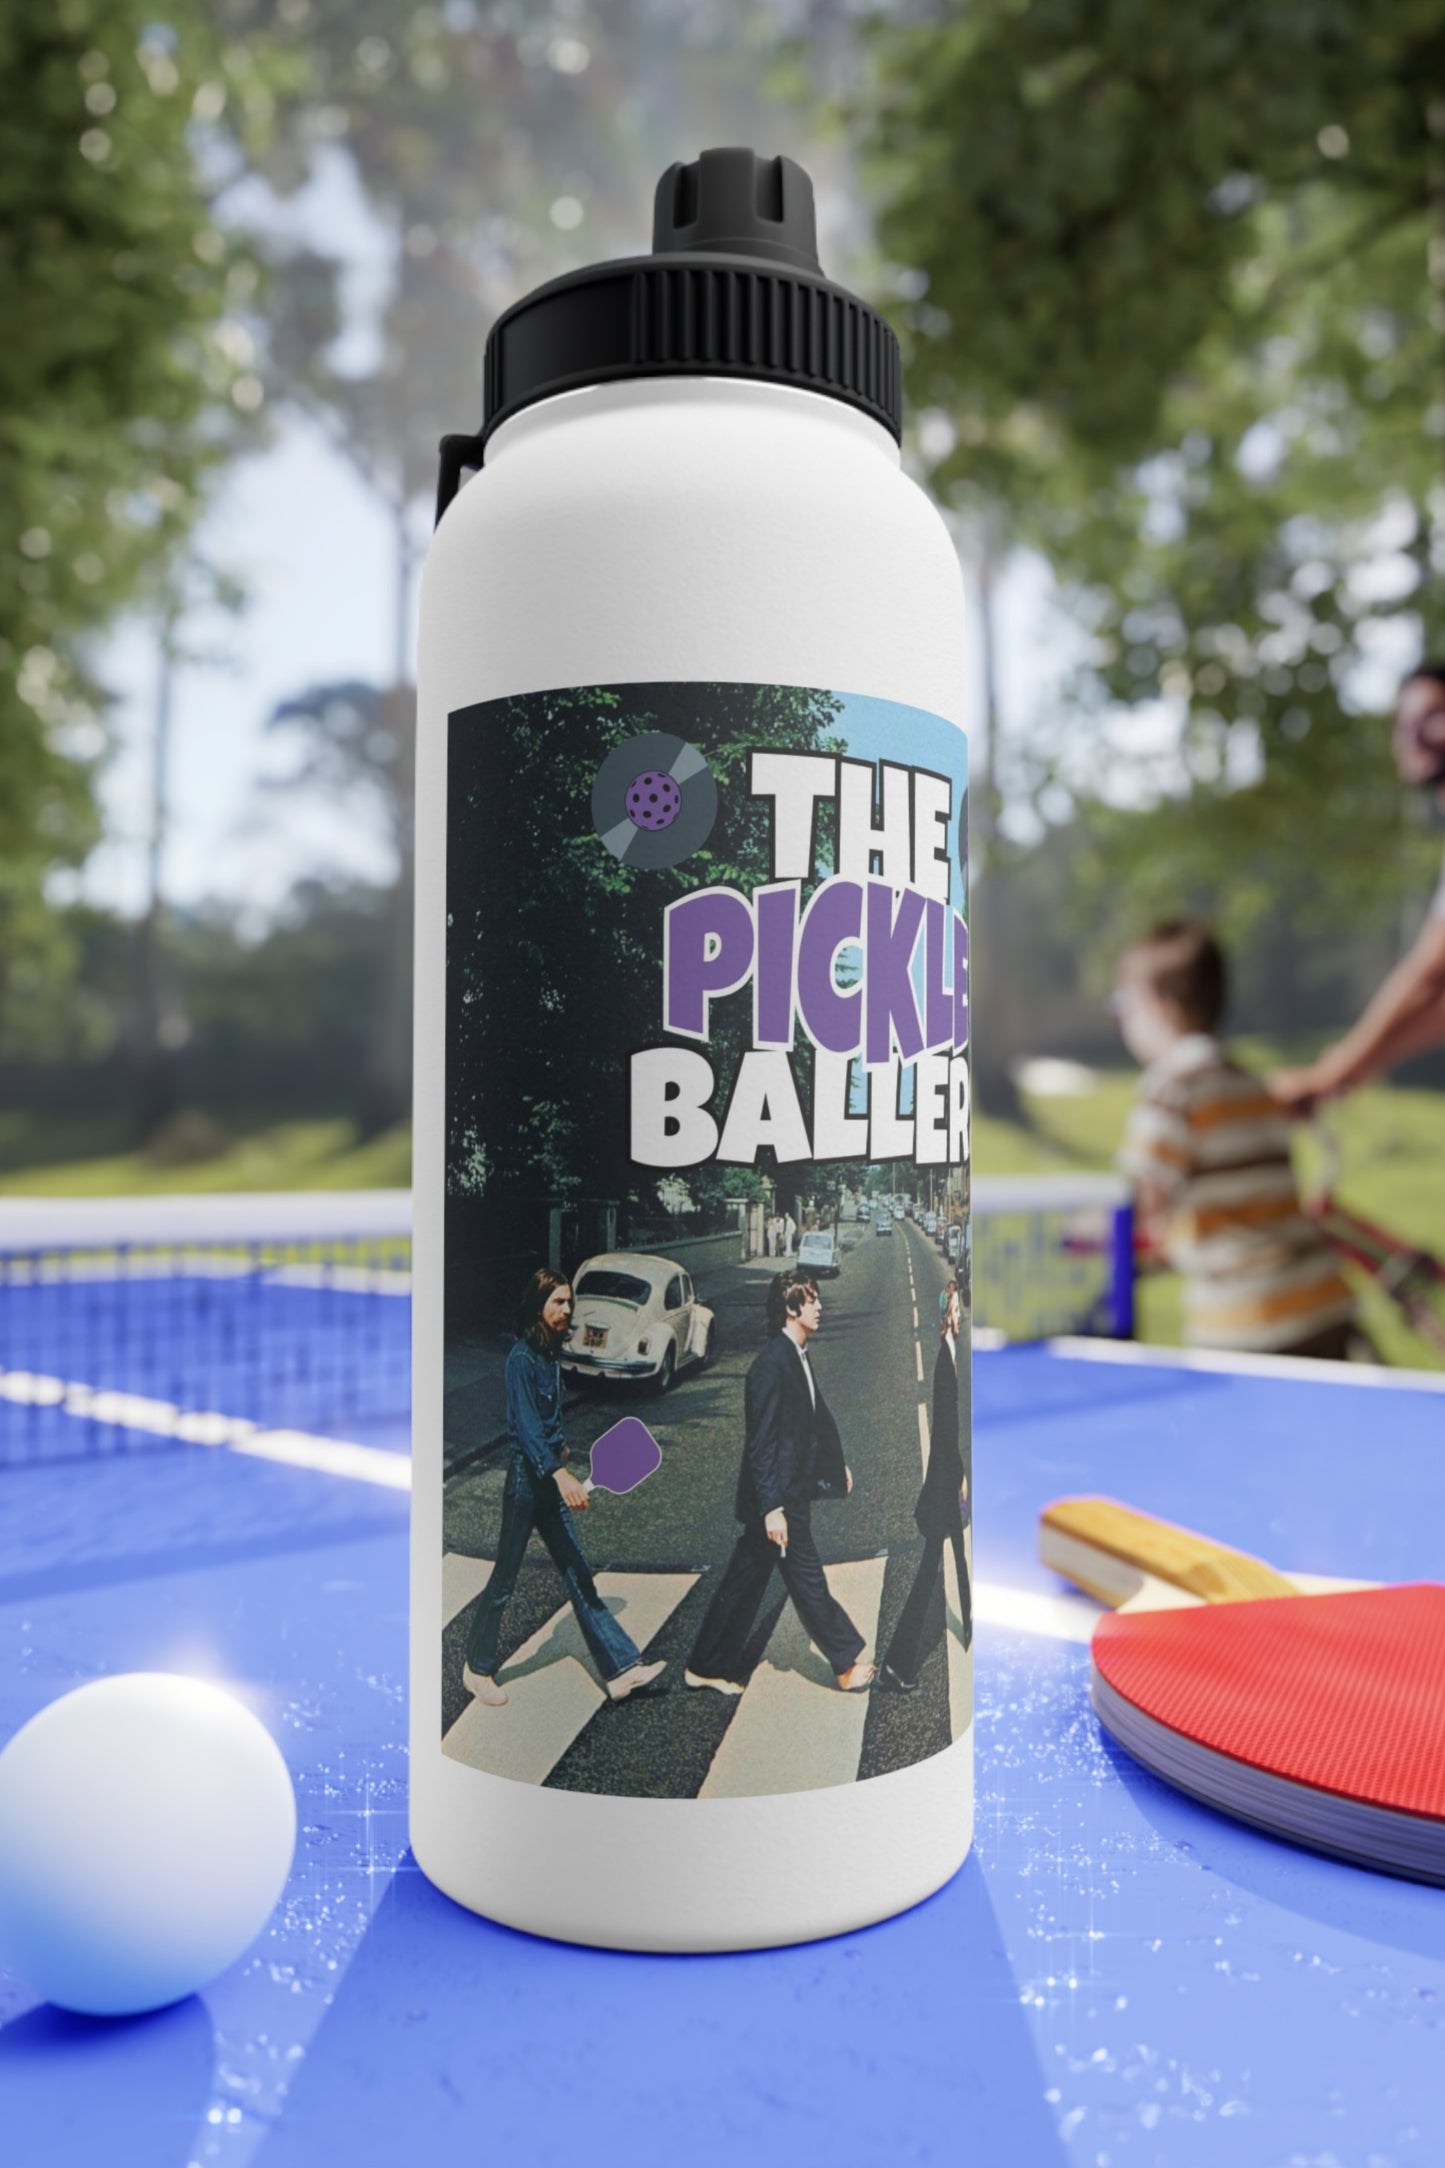 THE PICKLE BALLERS Purple